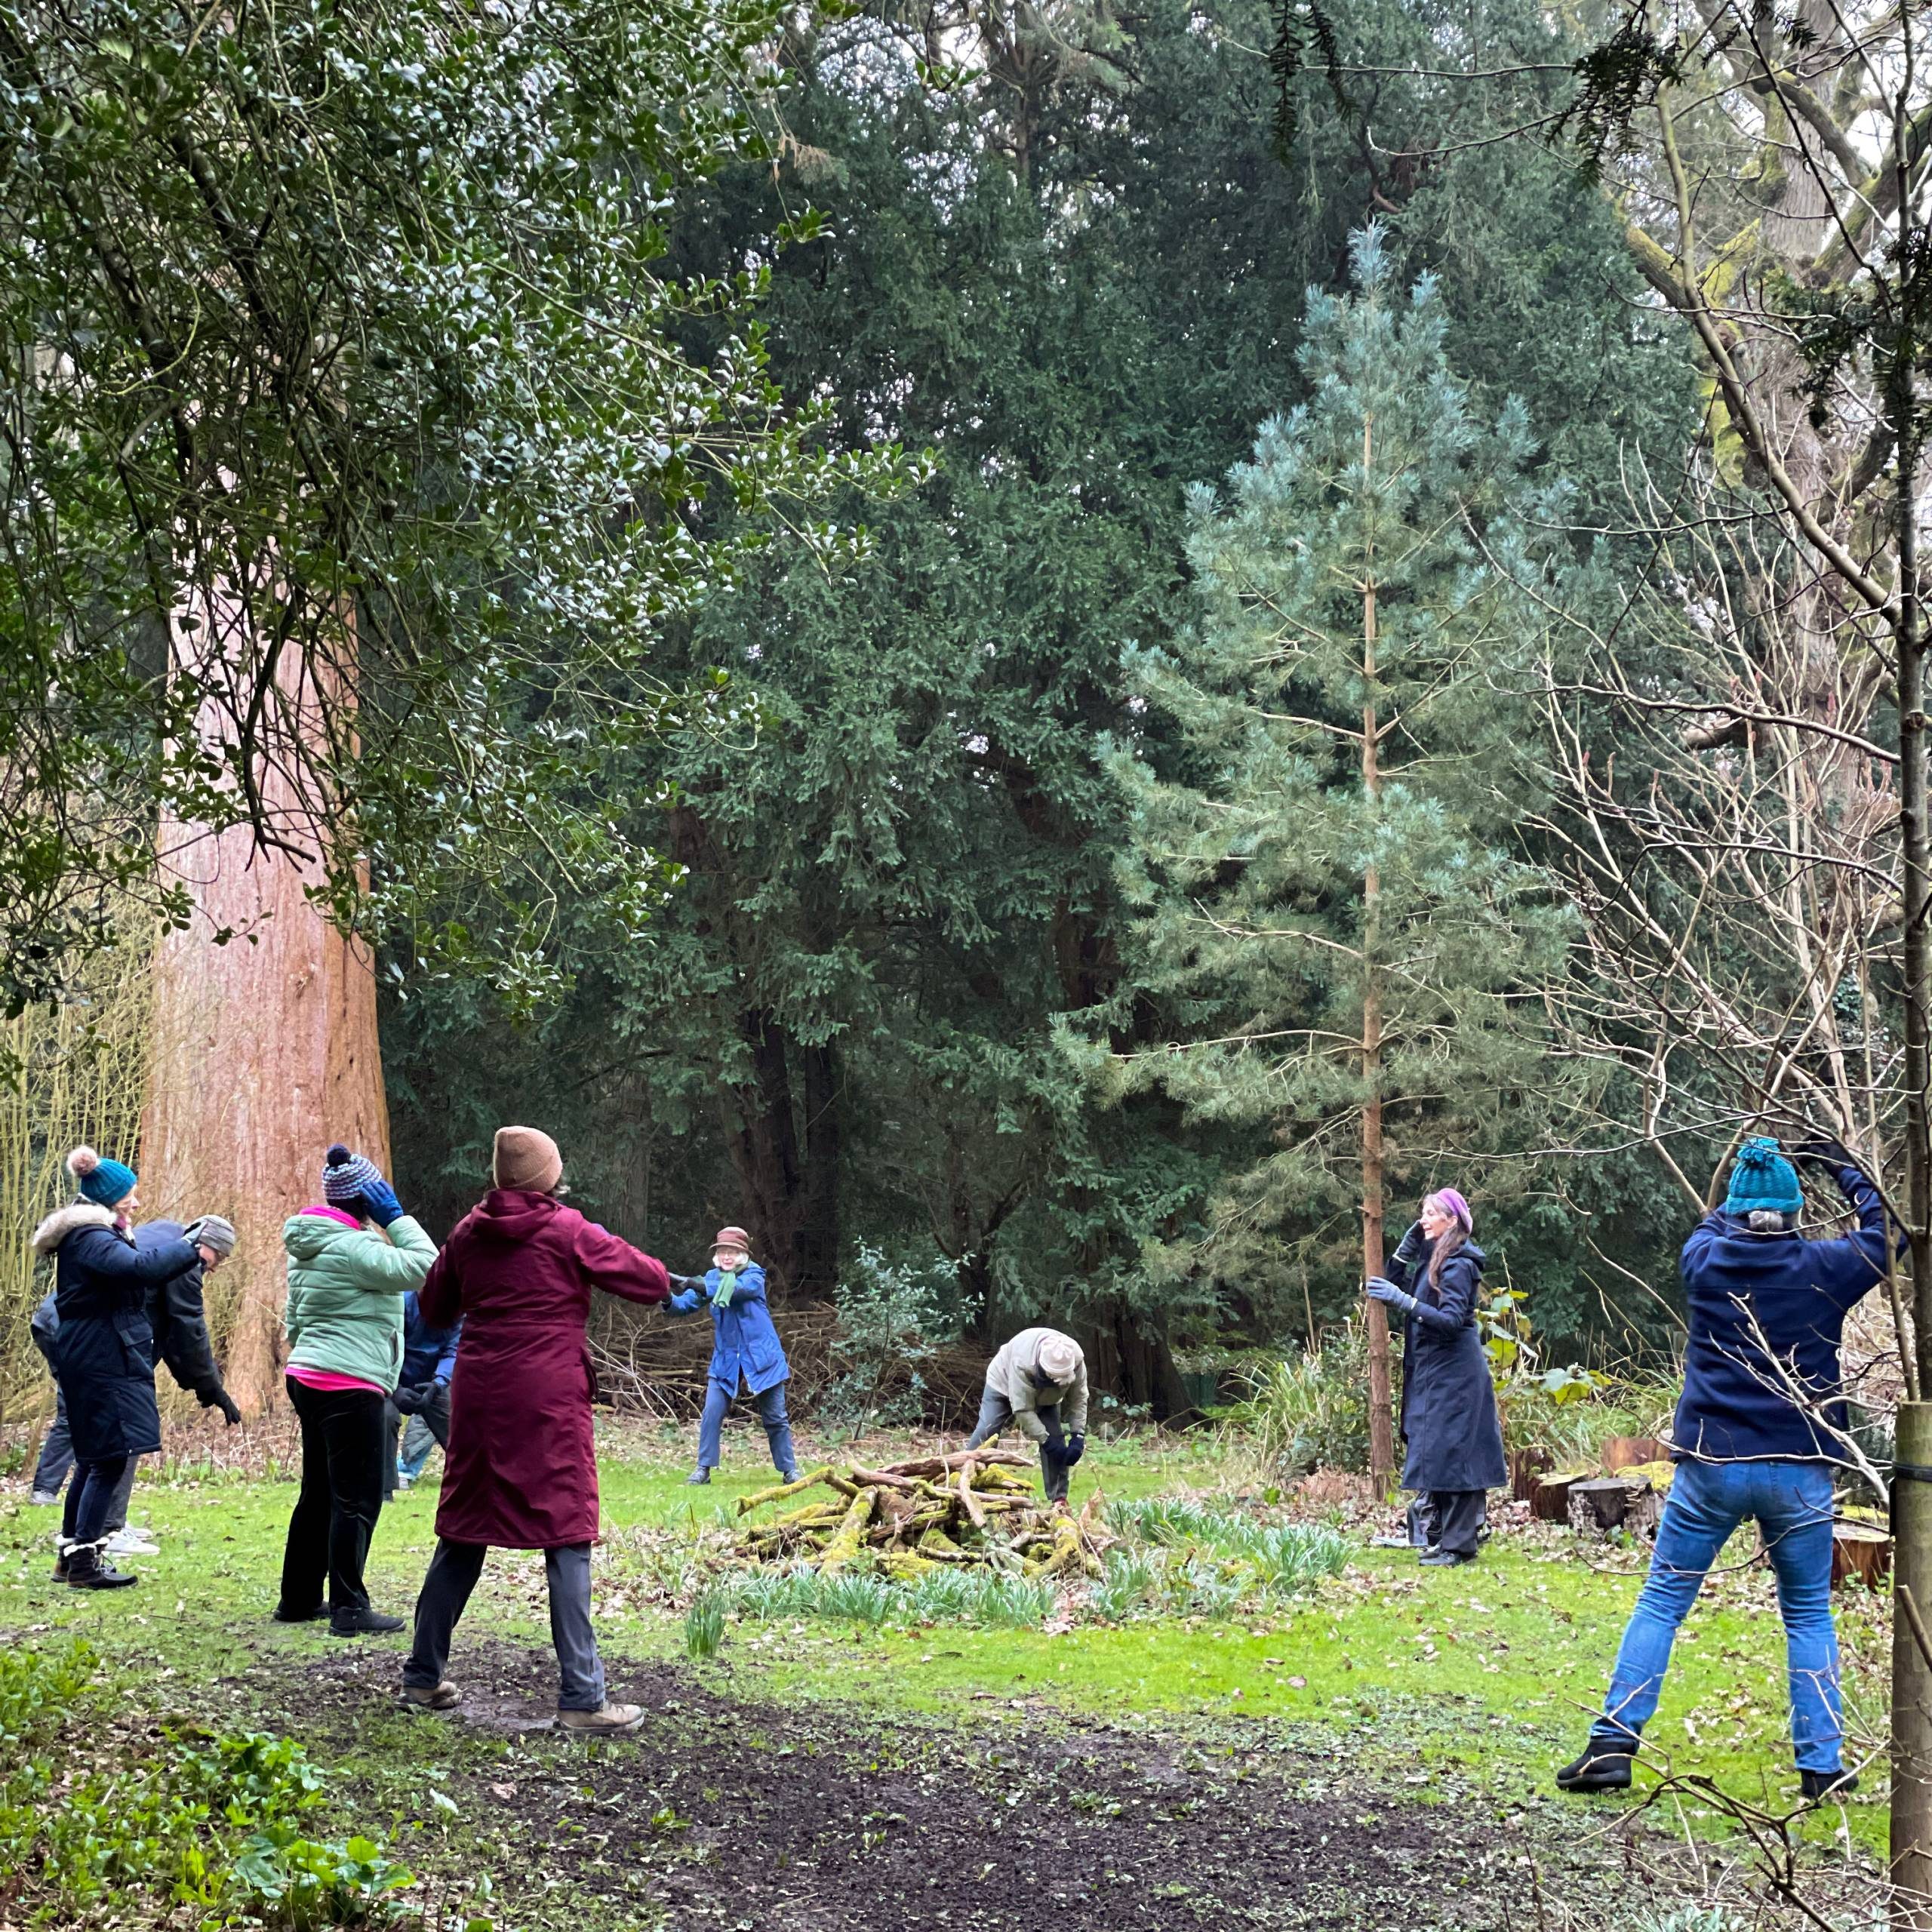 A group of people doing Tai Chi in hats and coats surrounded by woodland